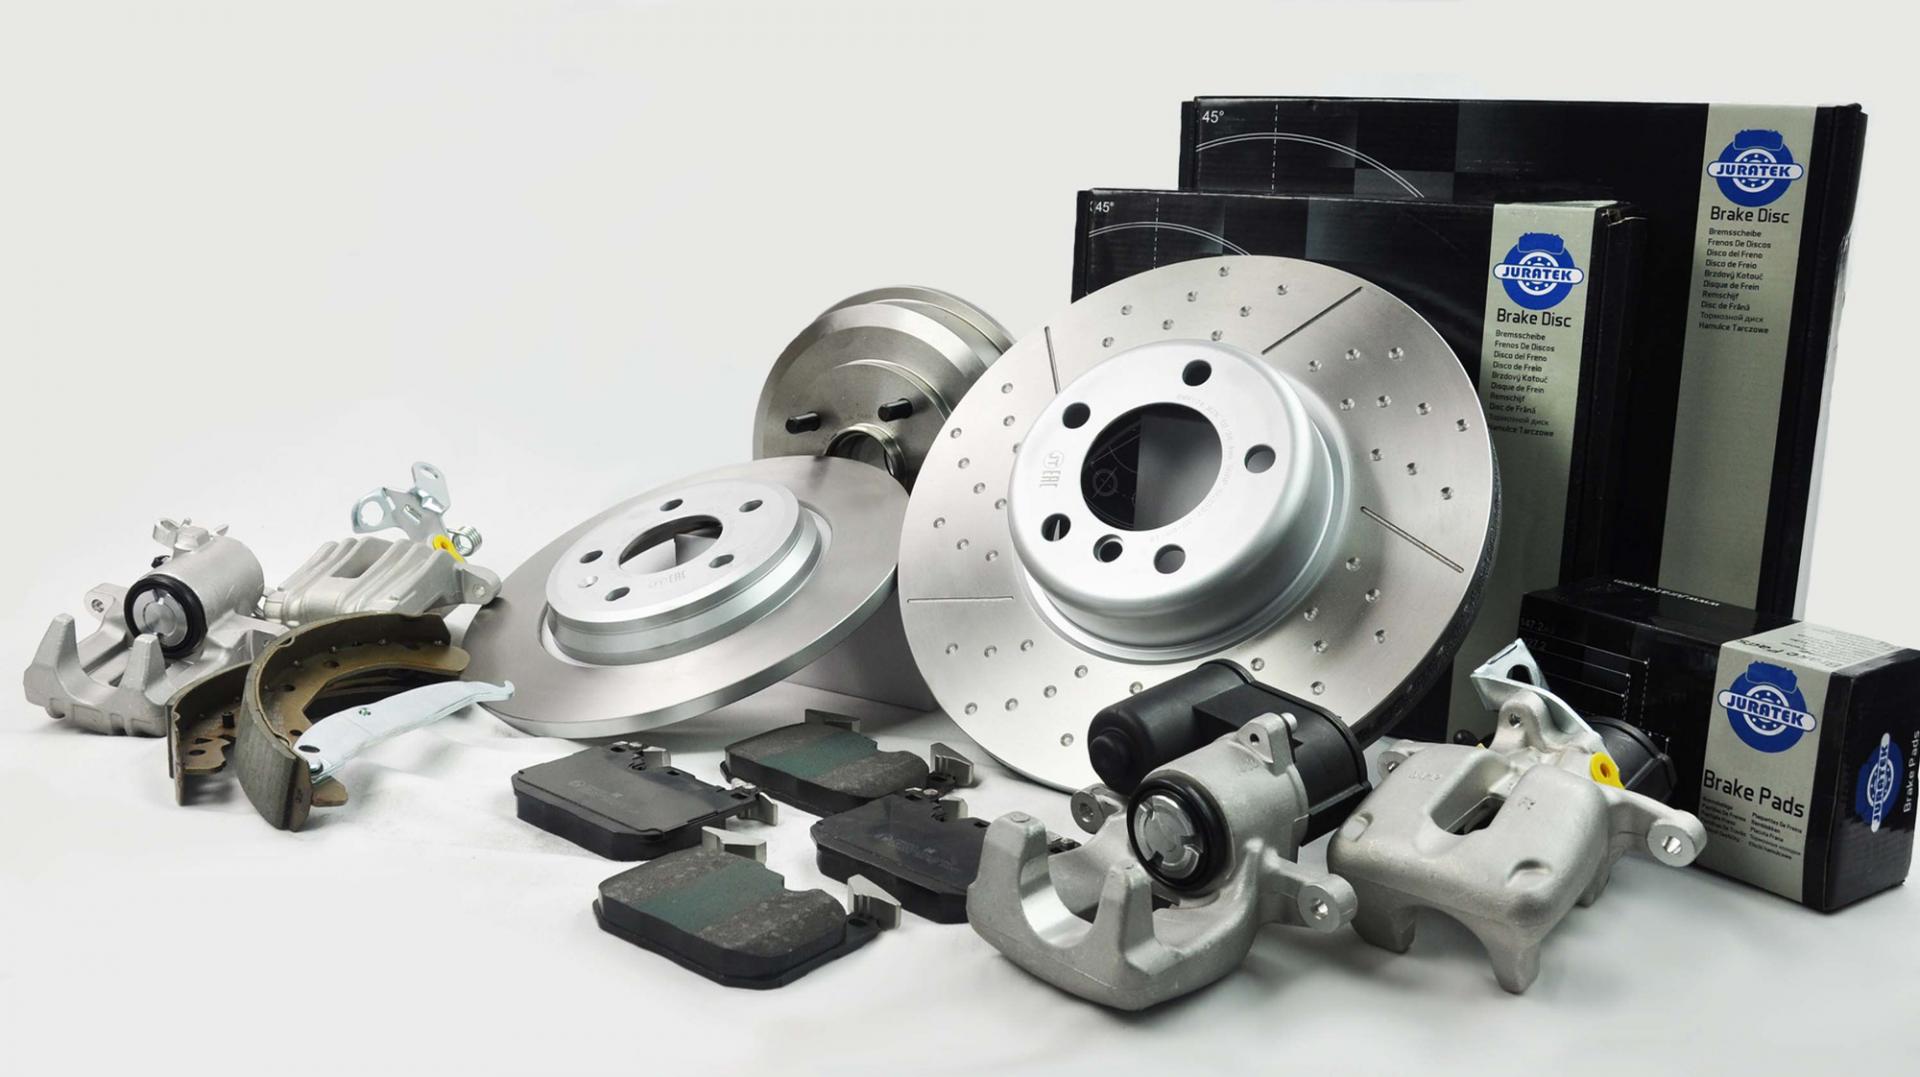 Vehicle parts supplier acquired at nearly 11x operating profits 